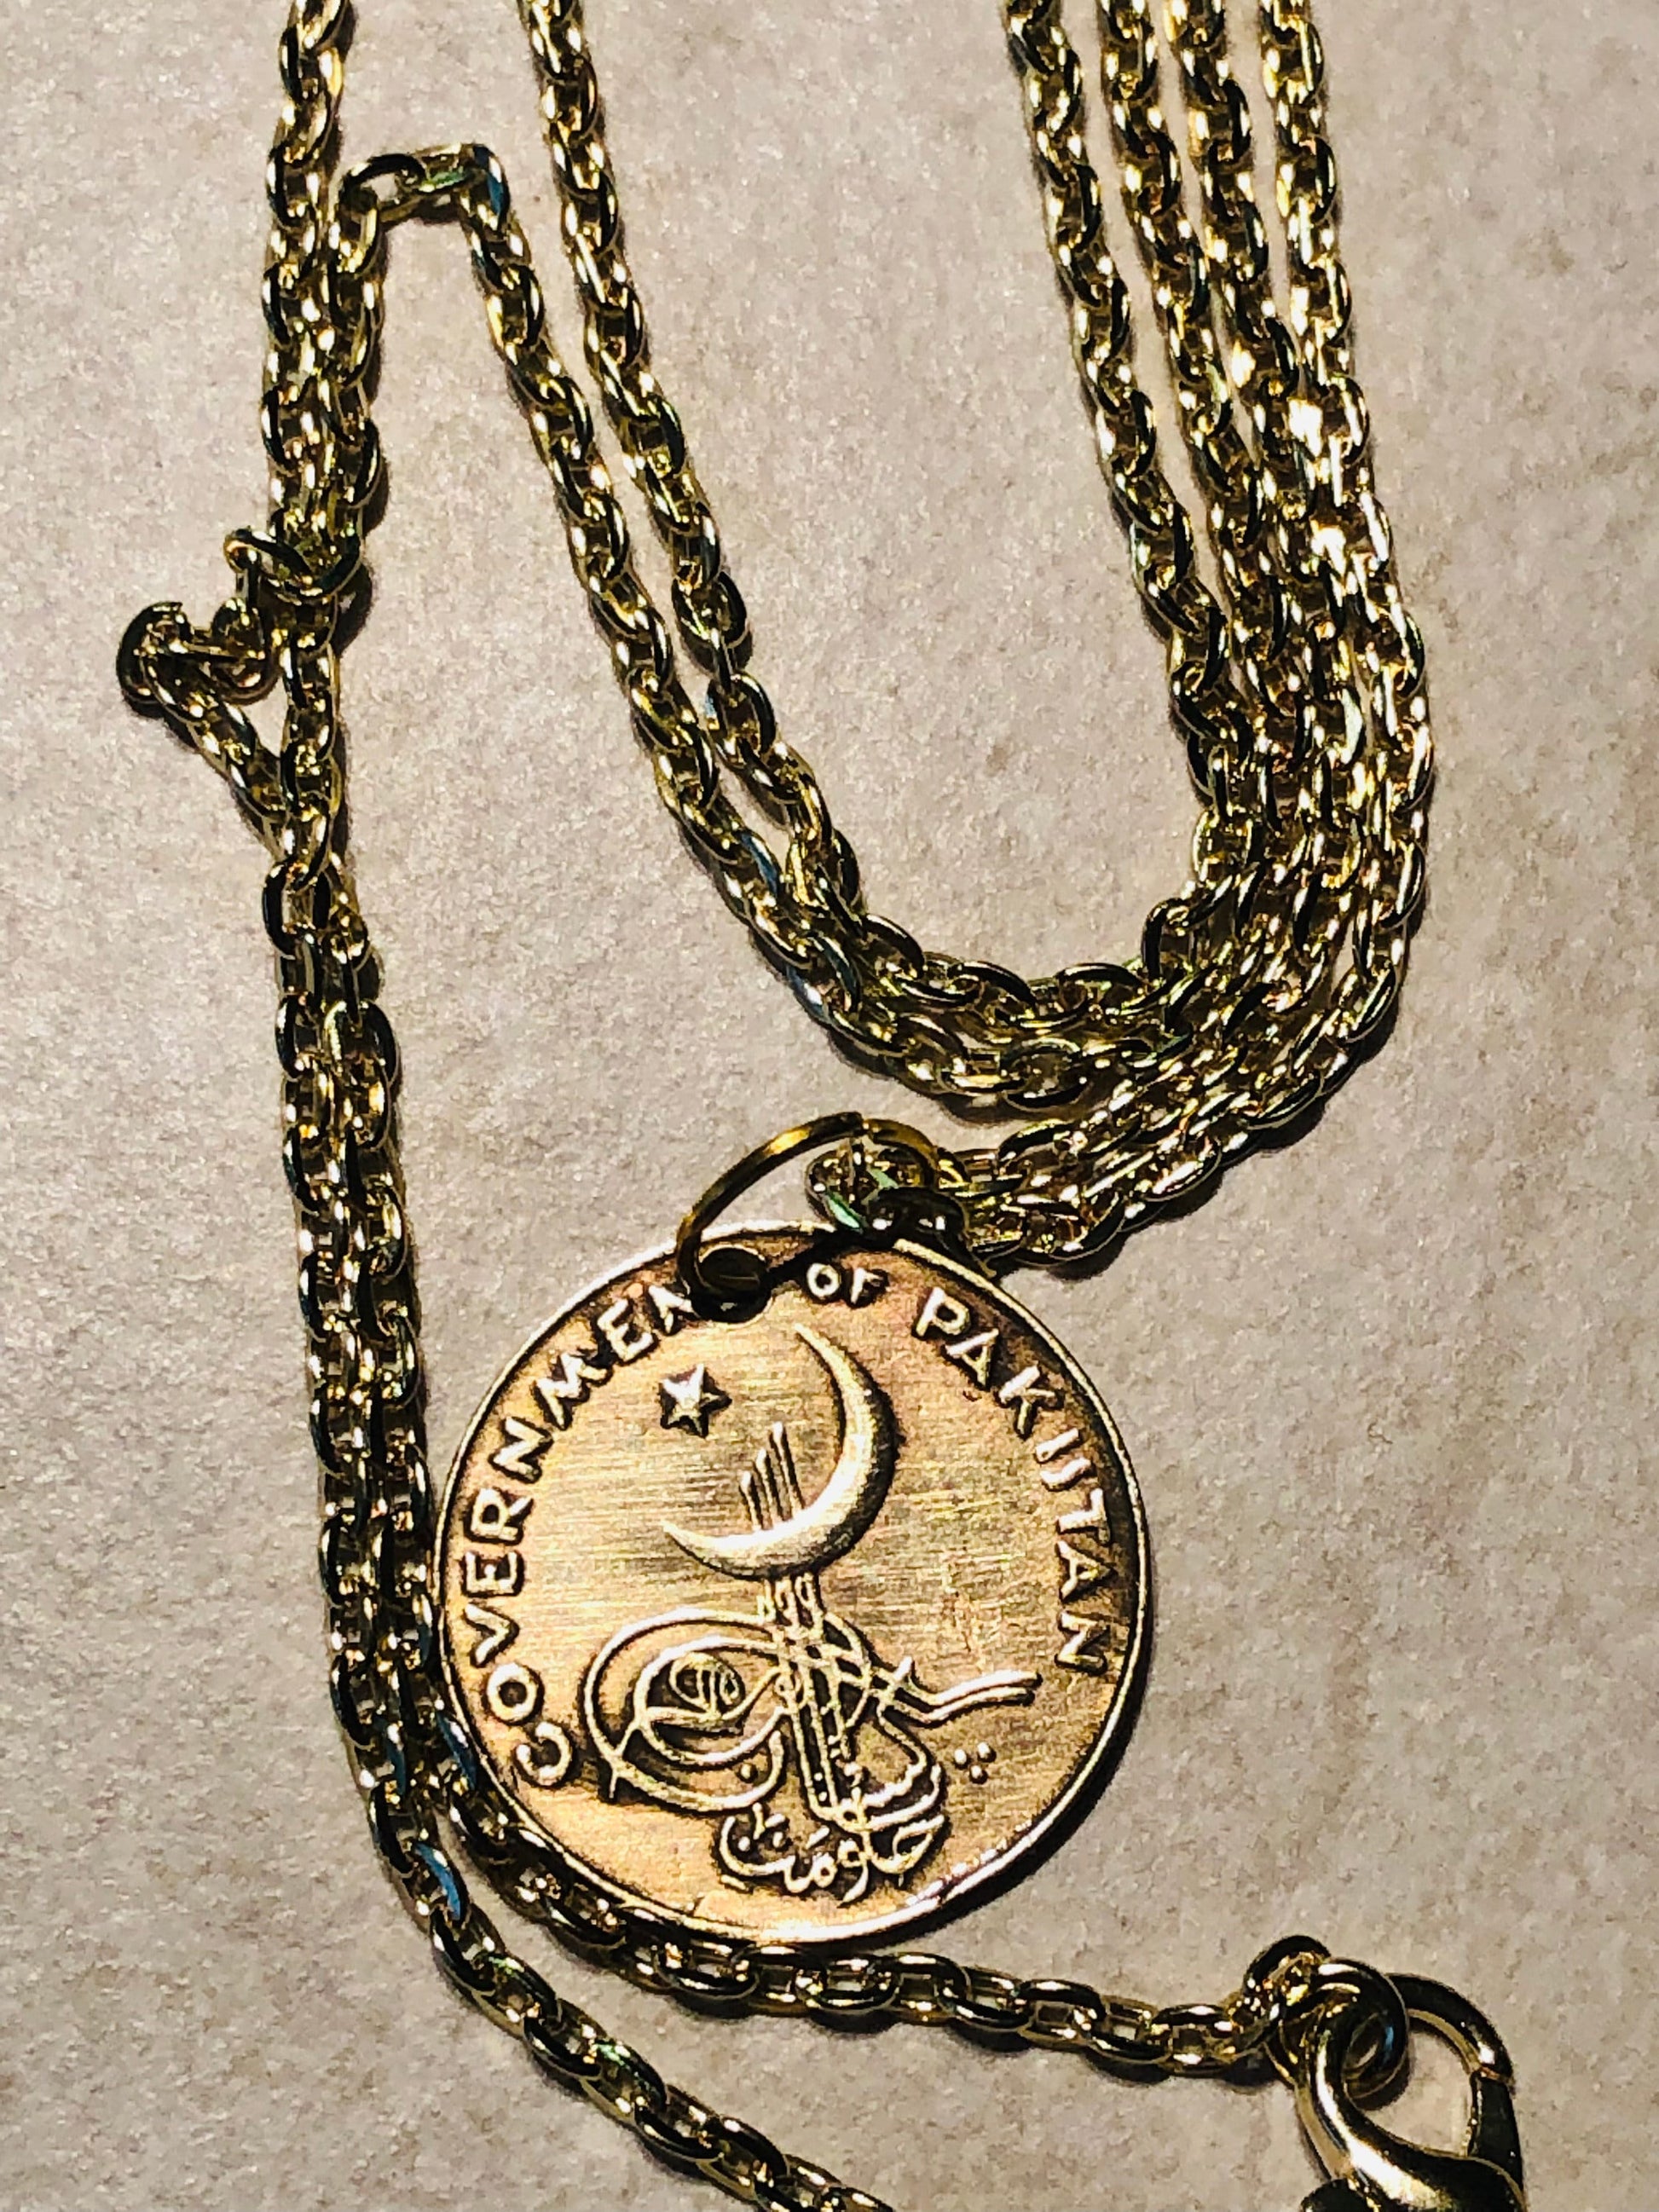 Pakistan Coin Pendant Pakistani 1 Pice Personal Necklace Old Vintage Handmade Jewelry Gift Friend Charm For Him Her World Coin Collector